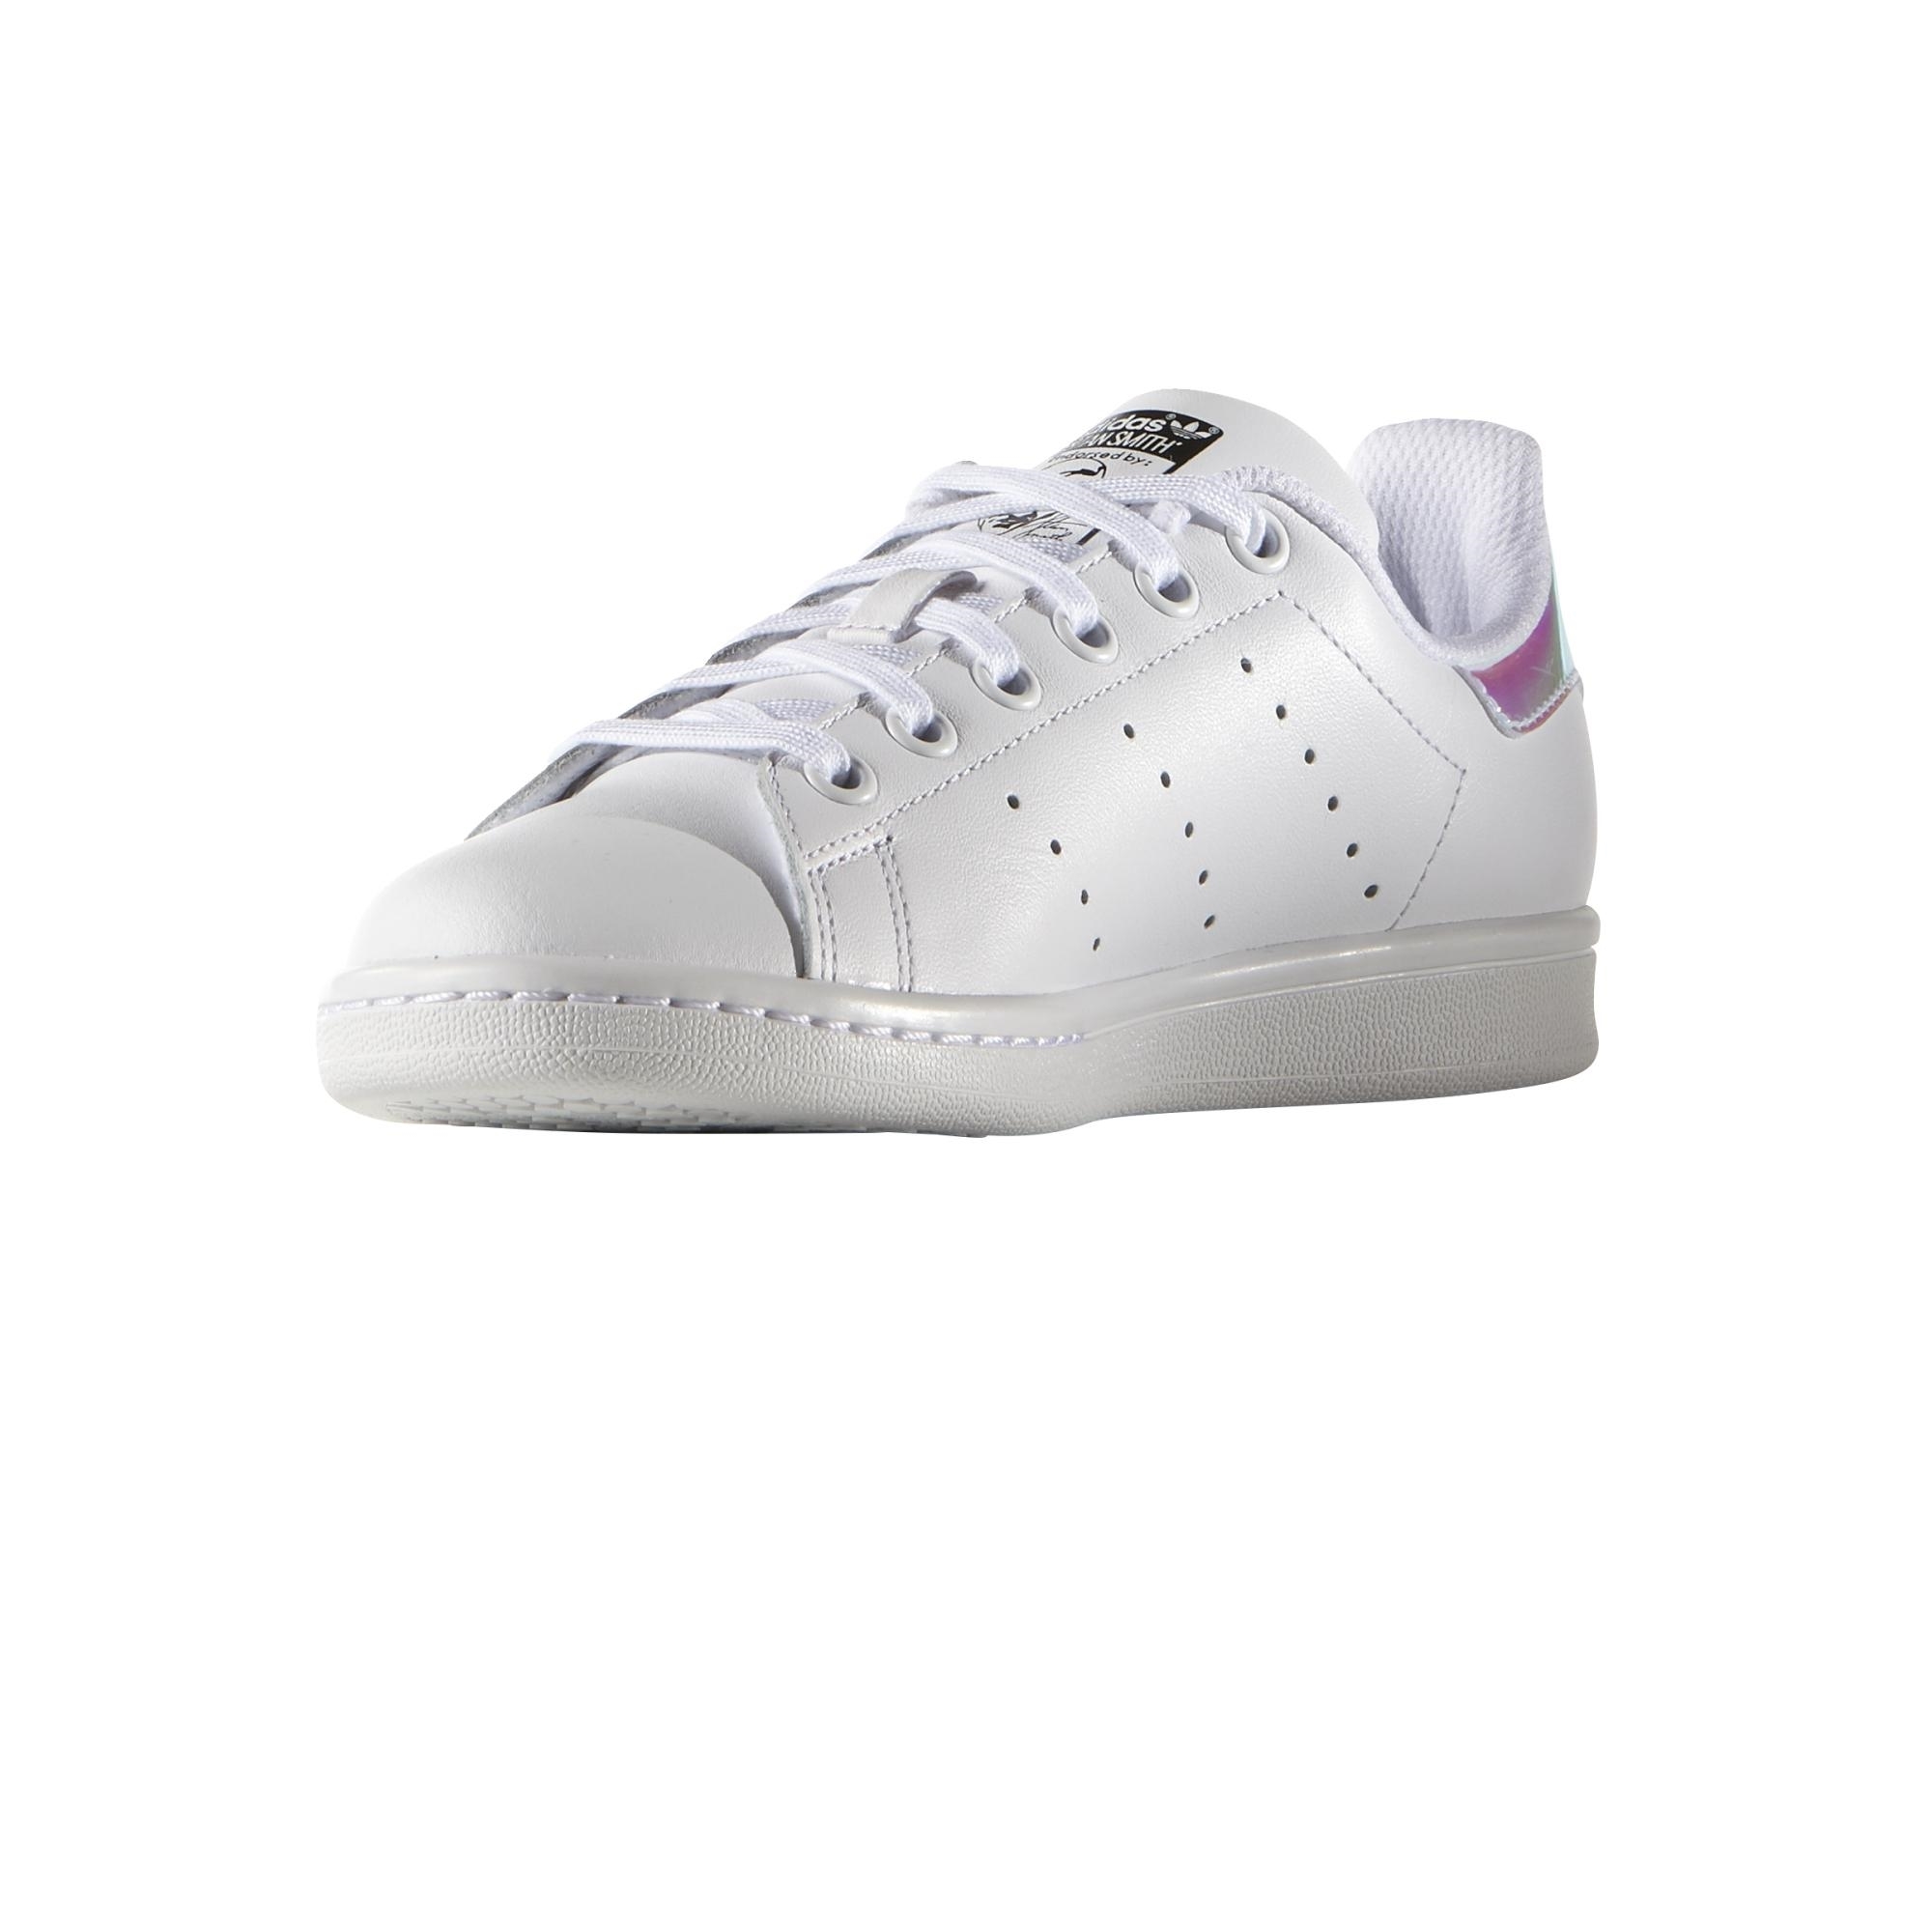 stan smith maculate dietro